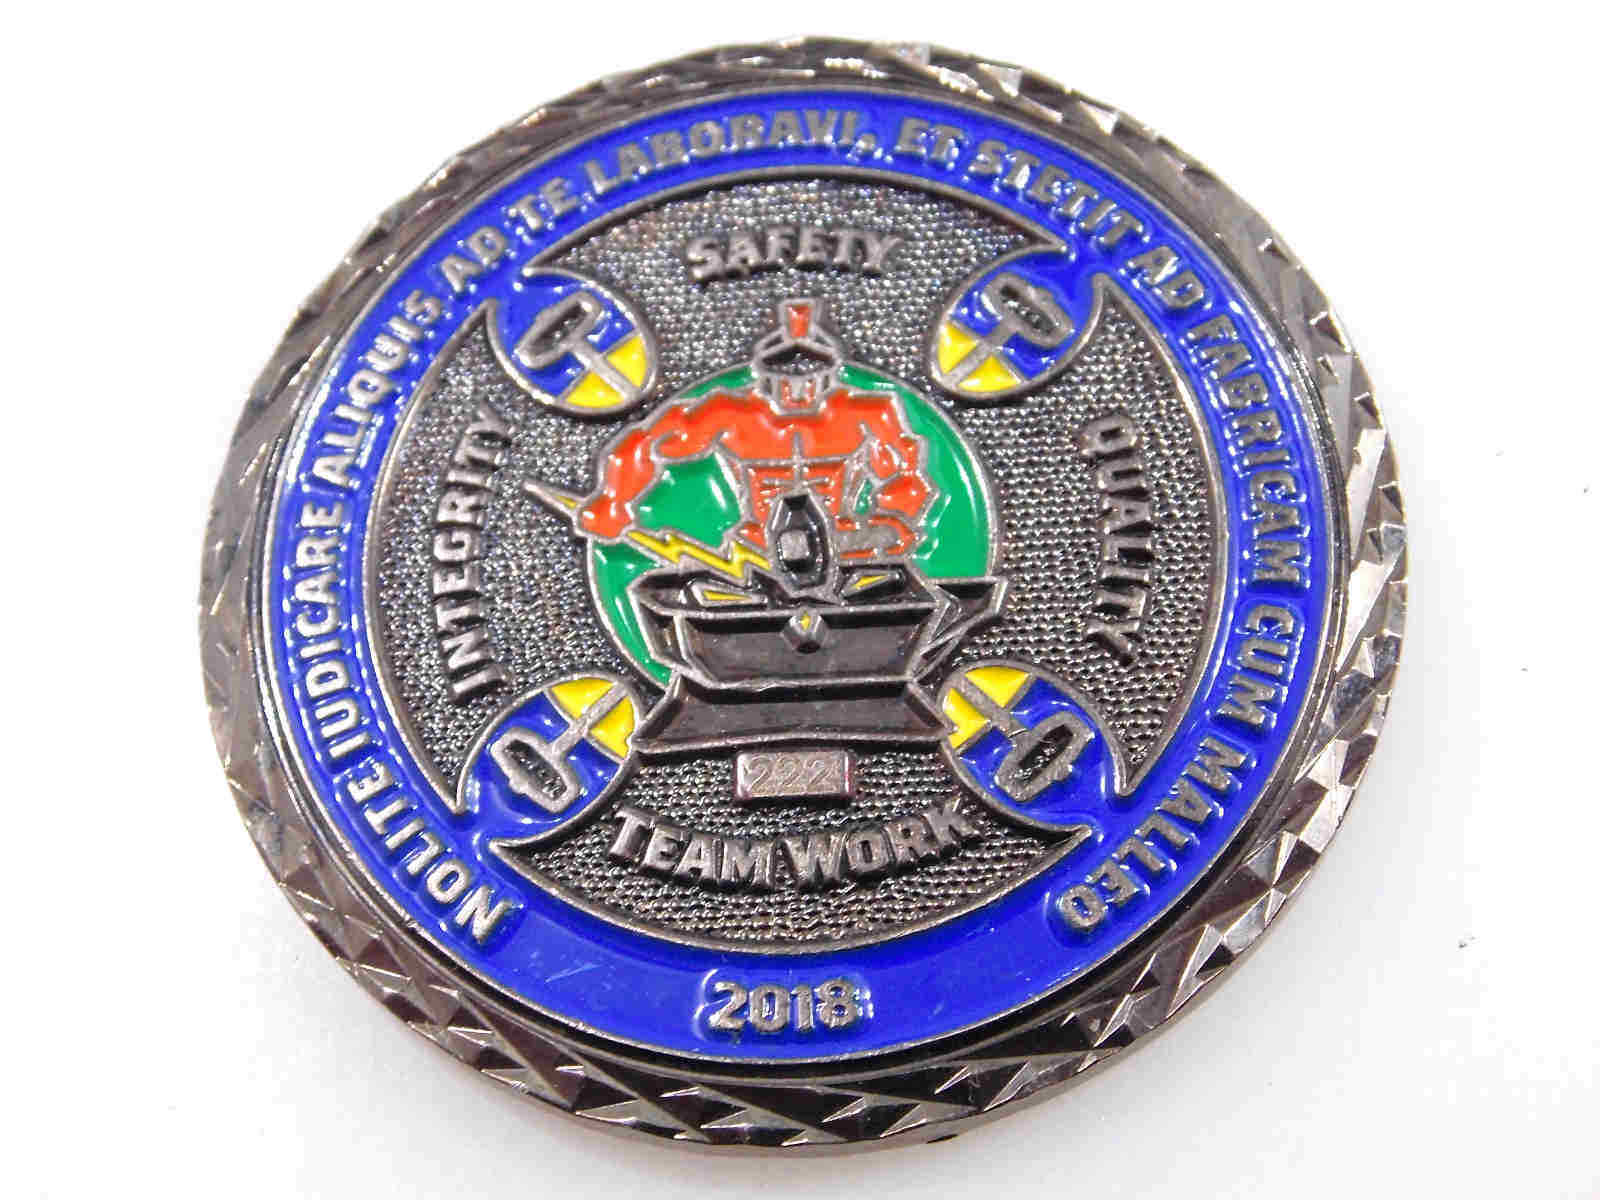 INTEGRTY SAFETY QUALITY TEAM WORK CHALLENGE COIN